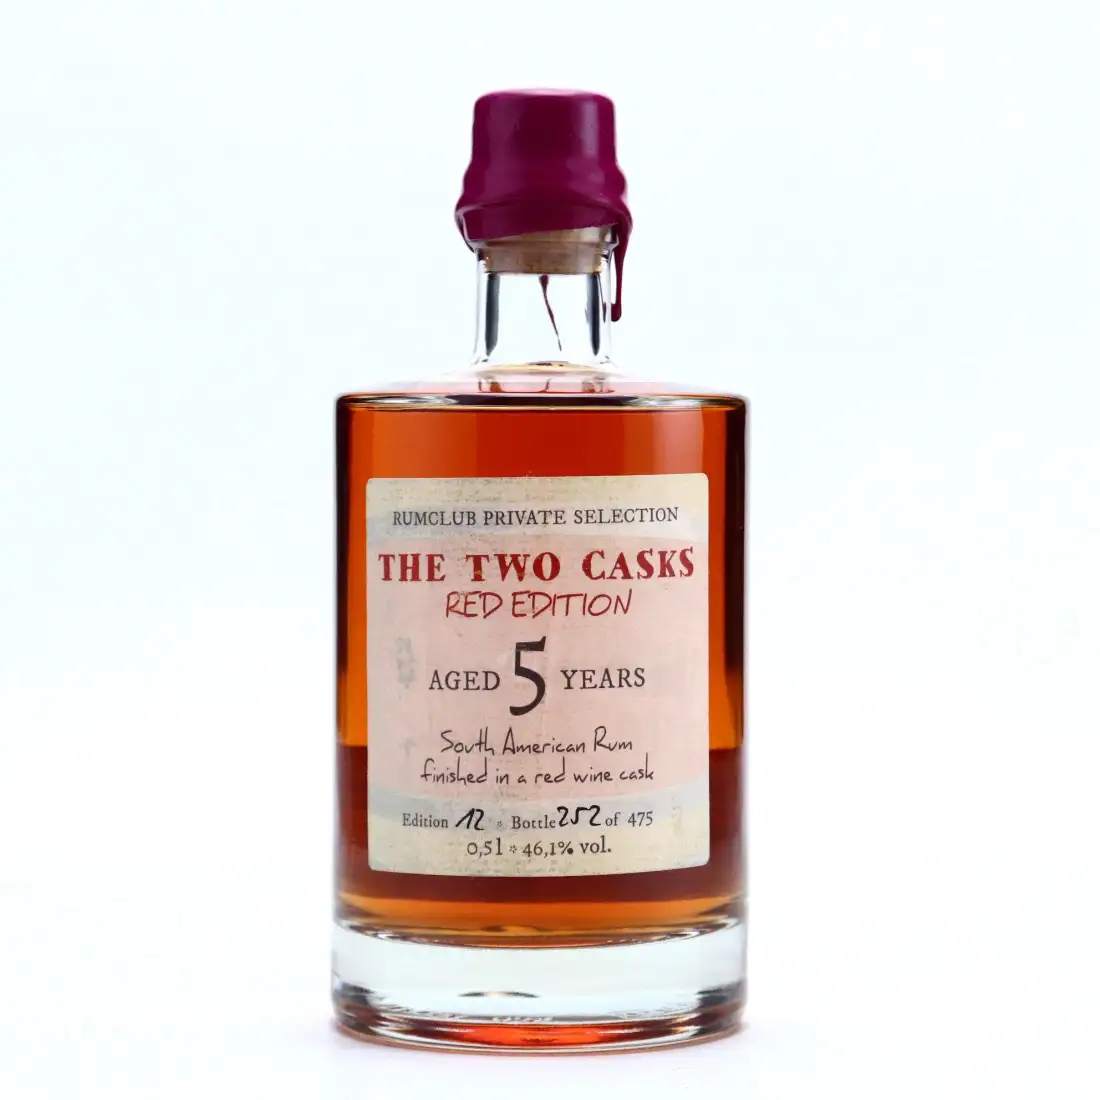 Image of the front of the bottle of the rum Rumclub Private Selection Ed. 12 The Two Casks Red Edition